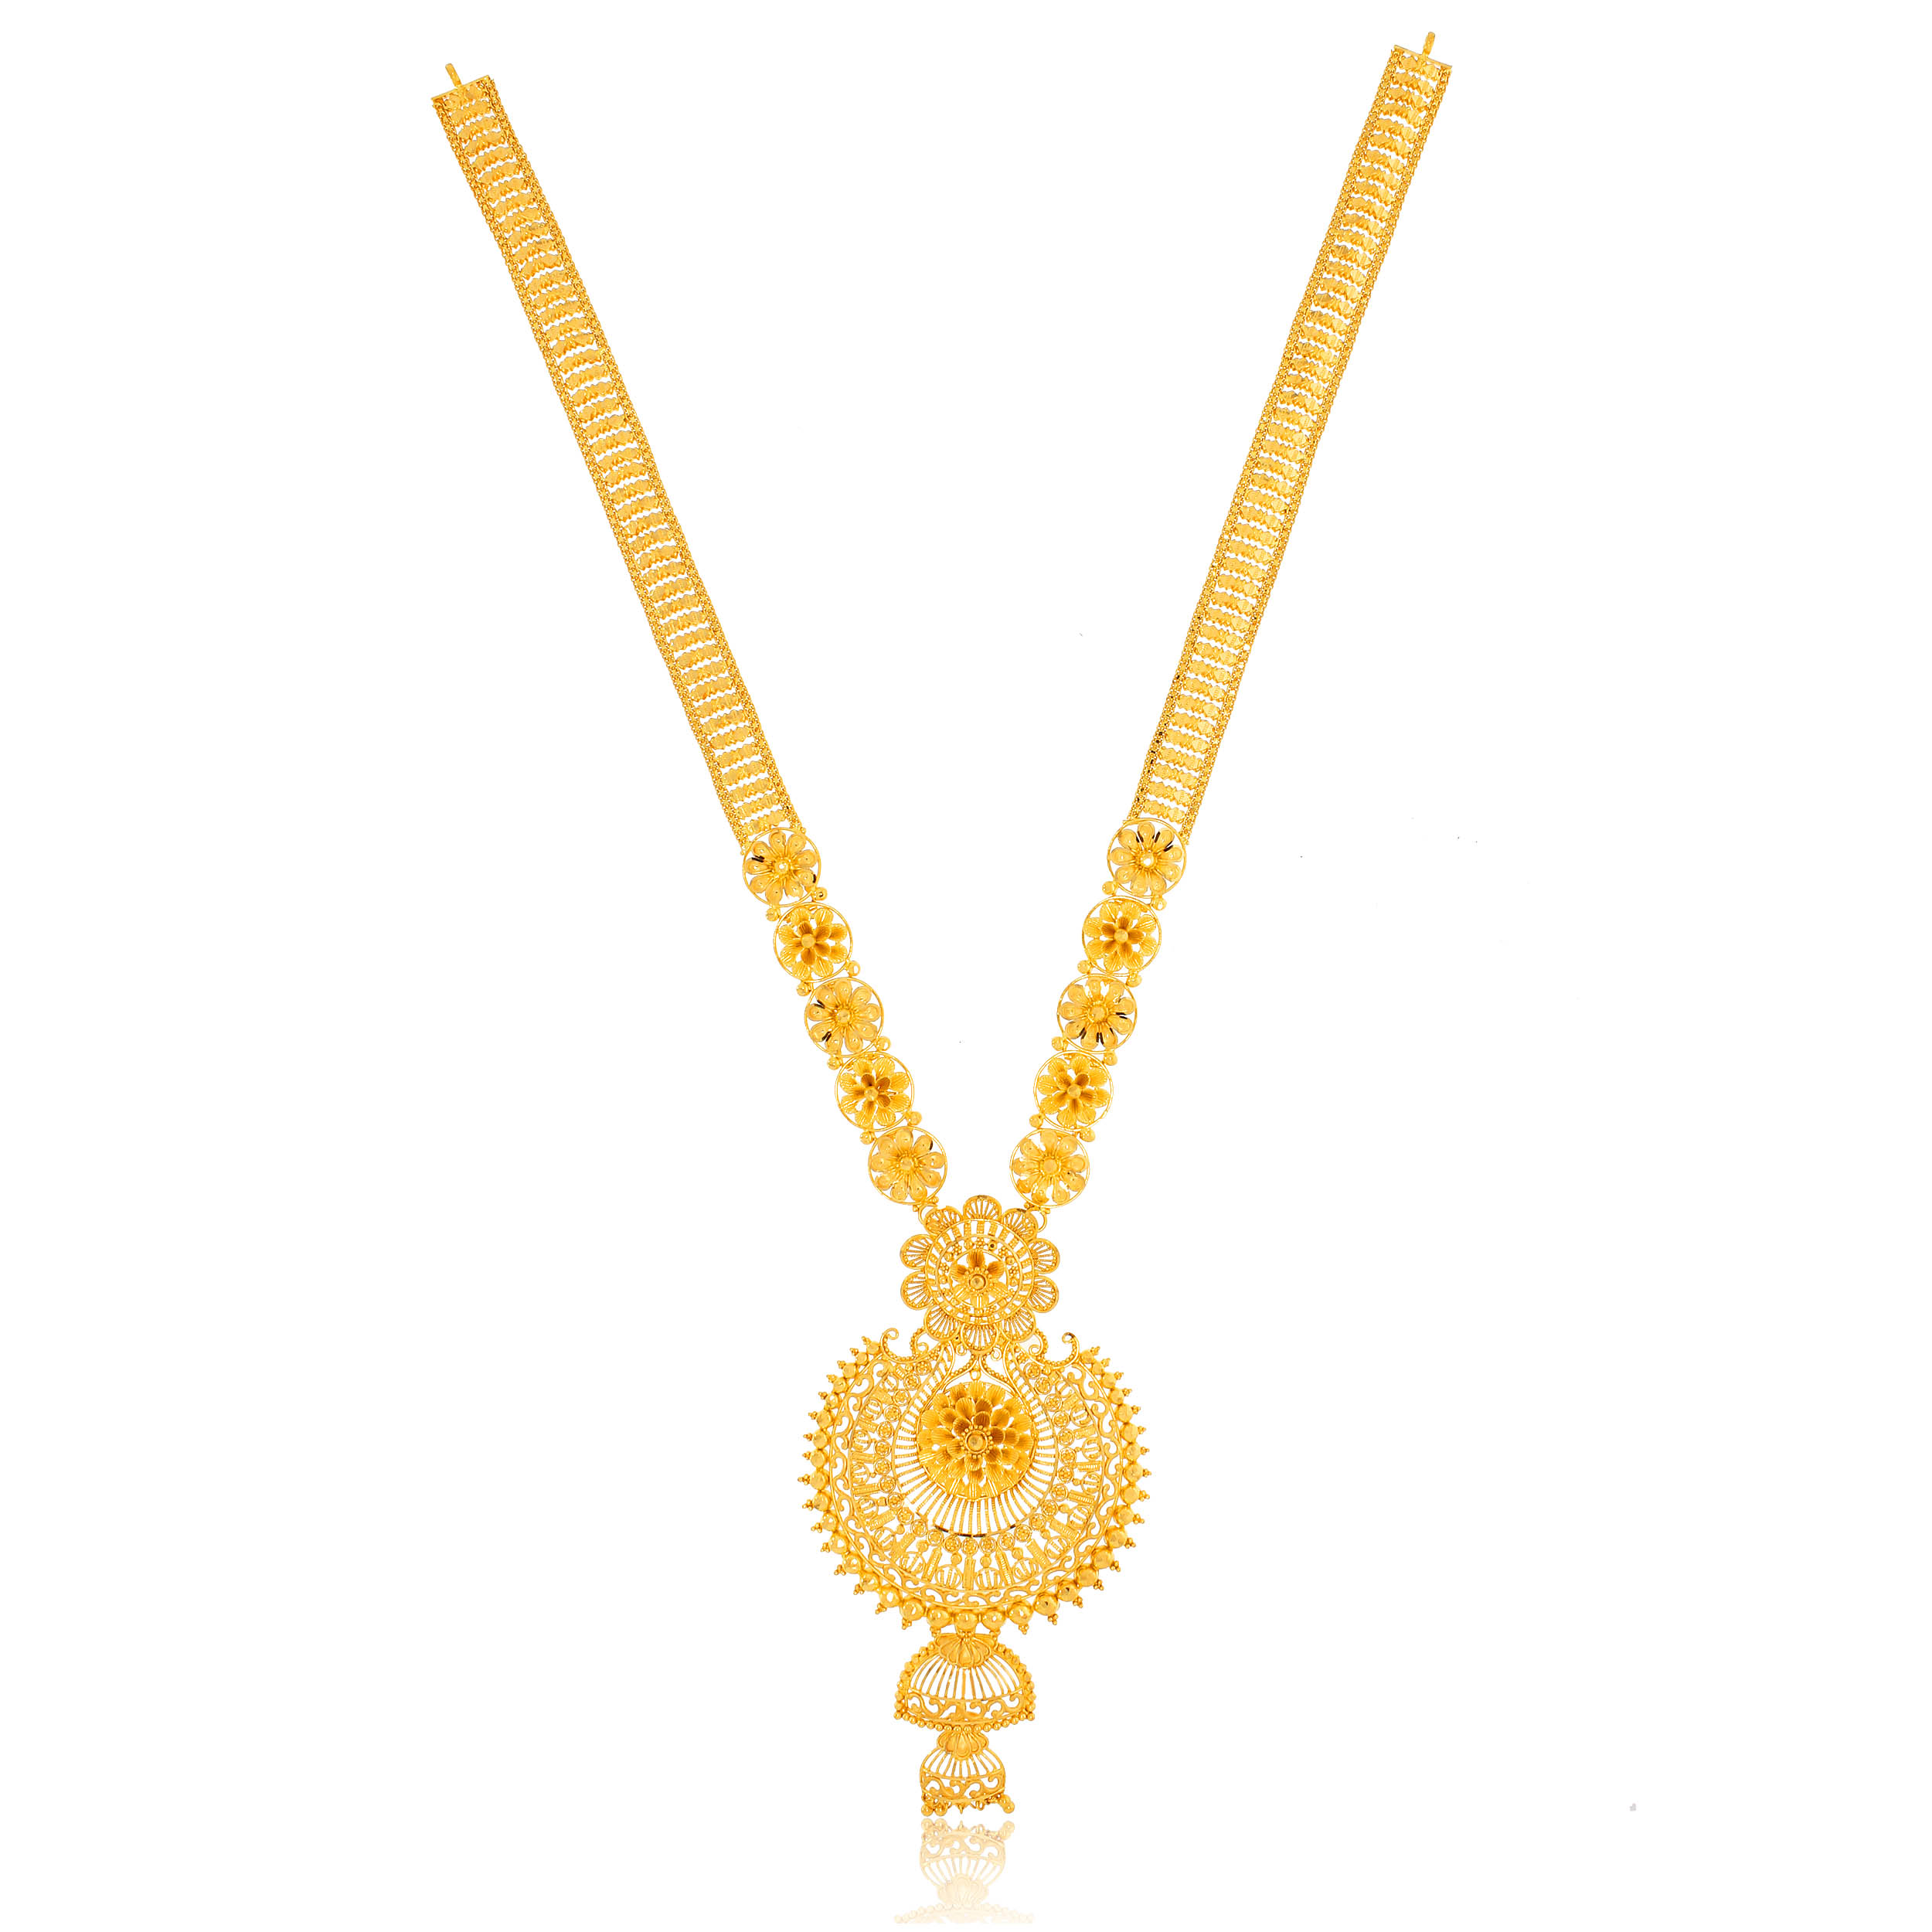 NEHA AABI JEWELS 22CT BIS HALLMARK GOLD LONG  NECKLACE FOR WOMAN